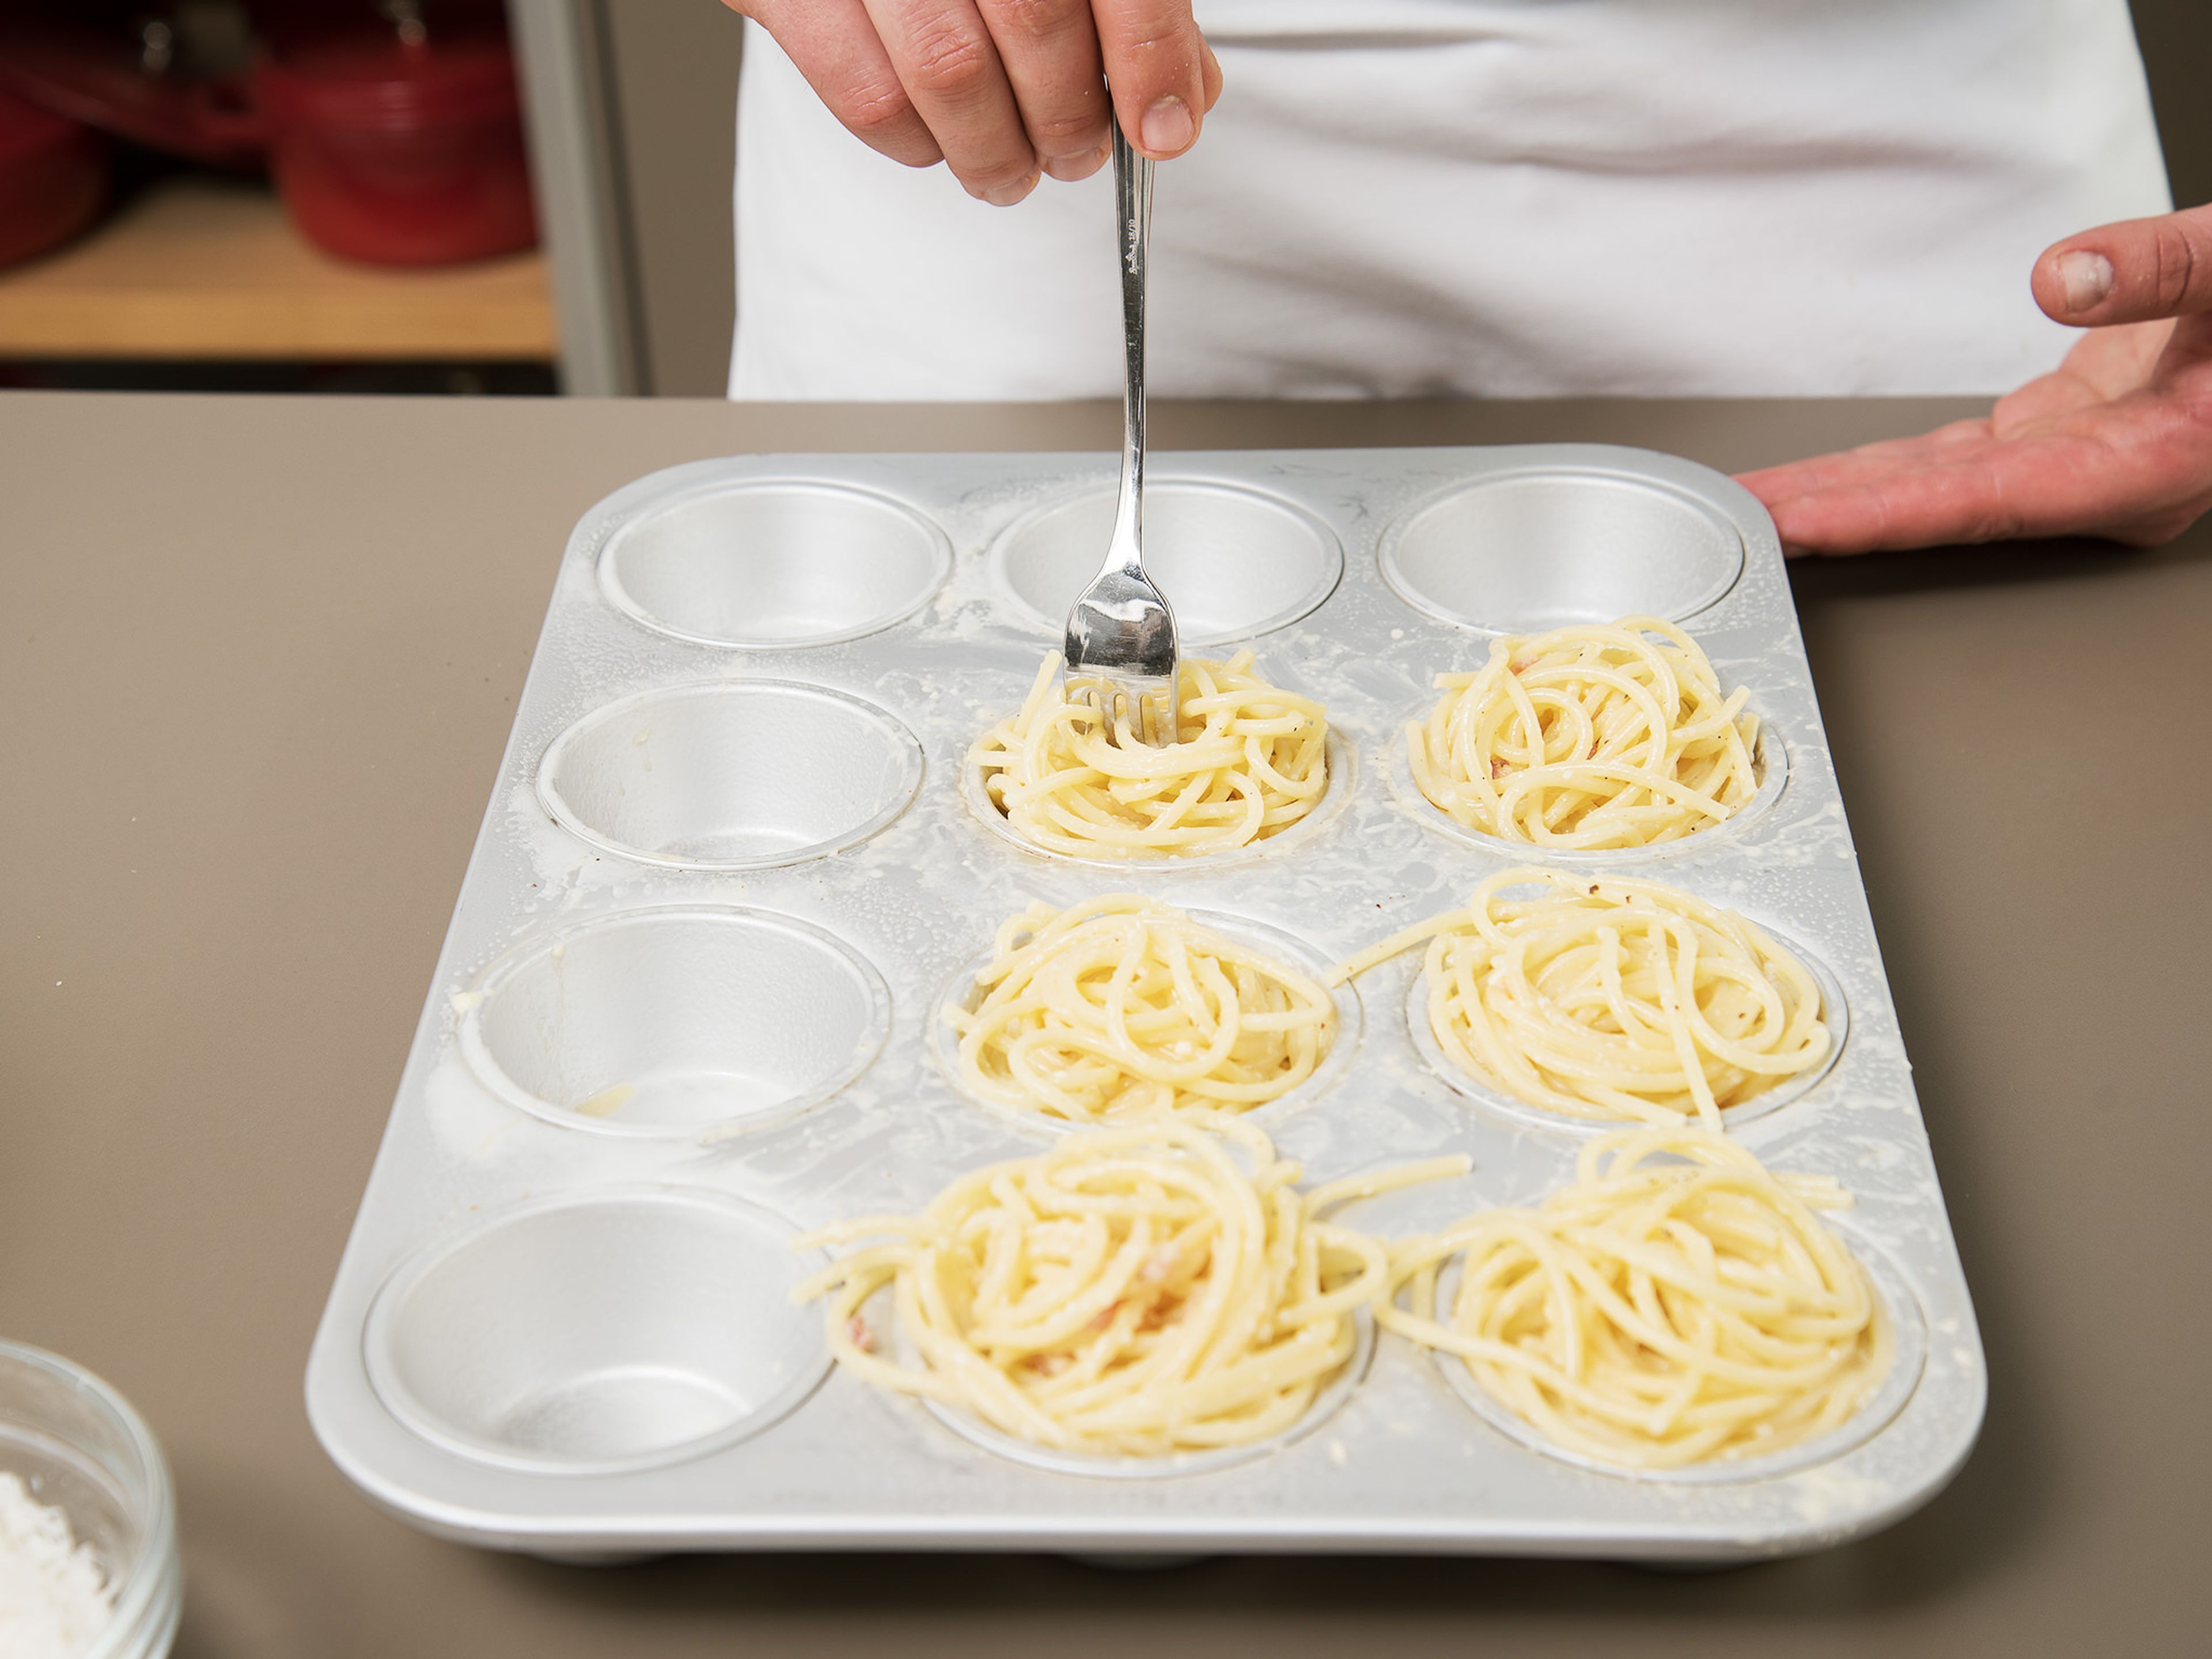 Grease the muffin tin. Twirl spaghetti strands around a fork and place into muffin cups. Sprinkle with the remaining Parmesan cheese, then bake at 180°C/350°F (convection) for approx. 15 – 20 min.